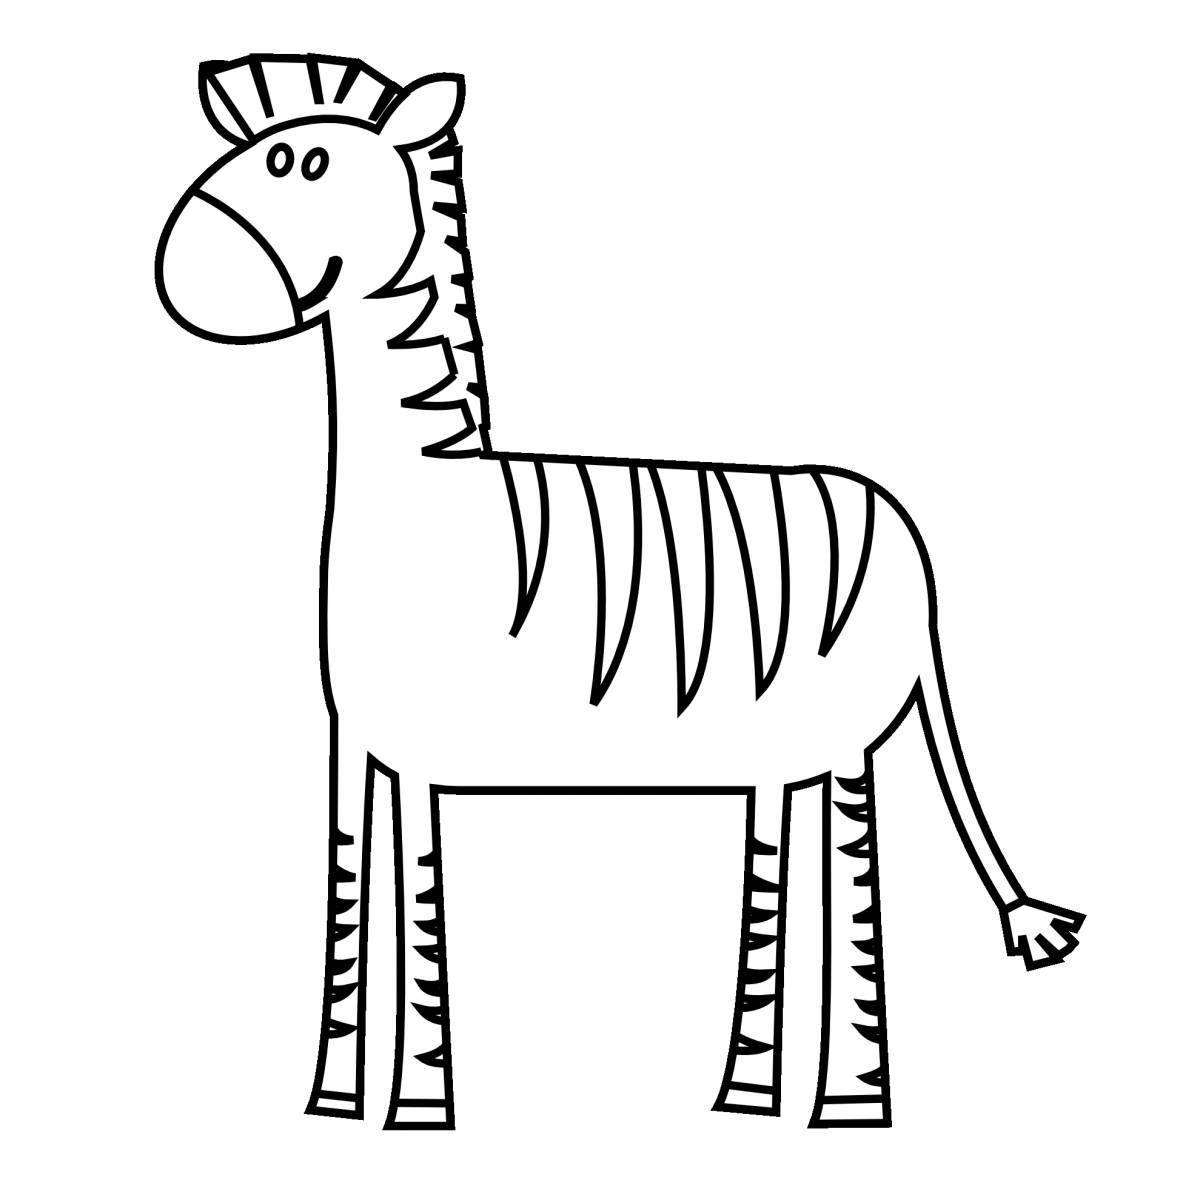 Adorable zebra without stripes for kids